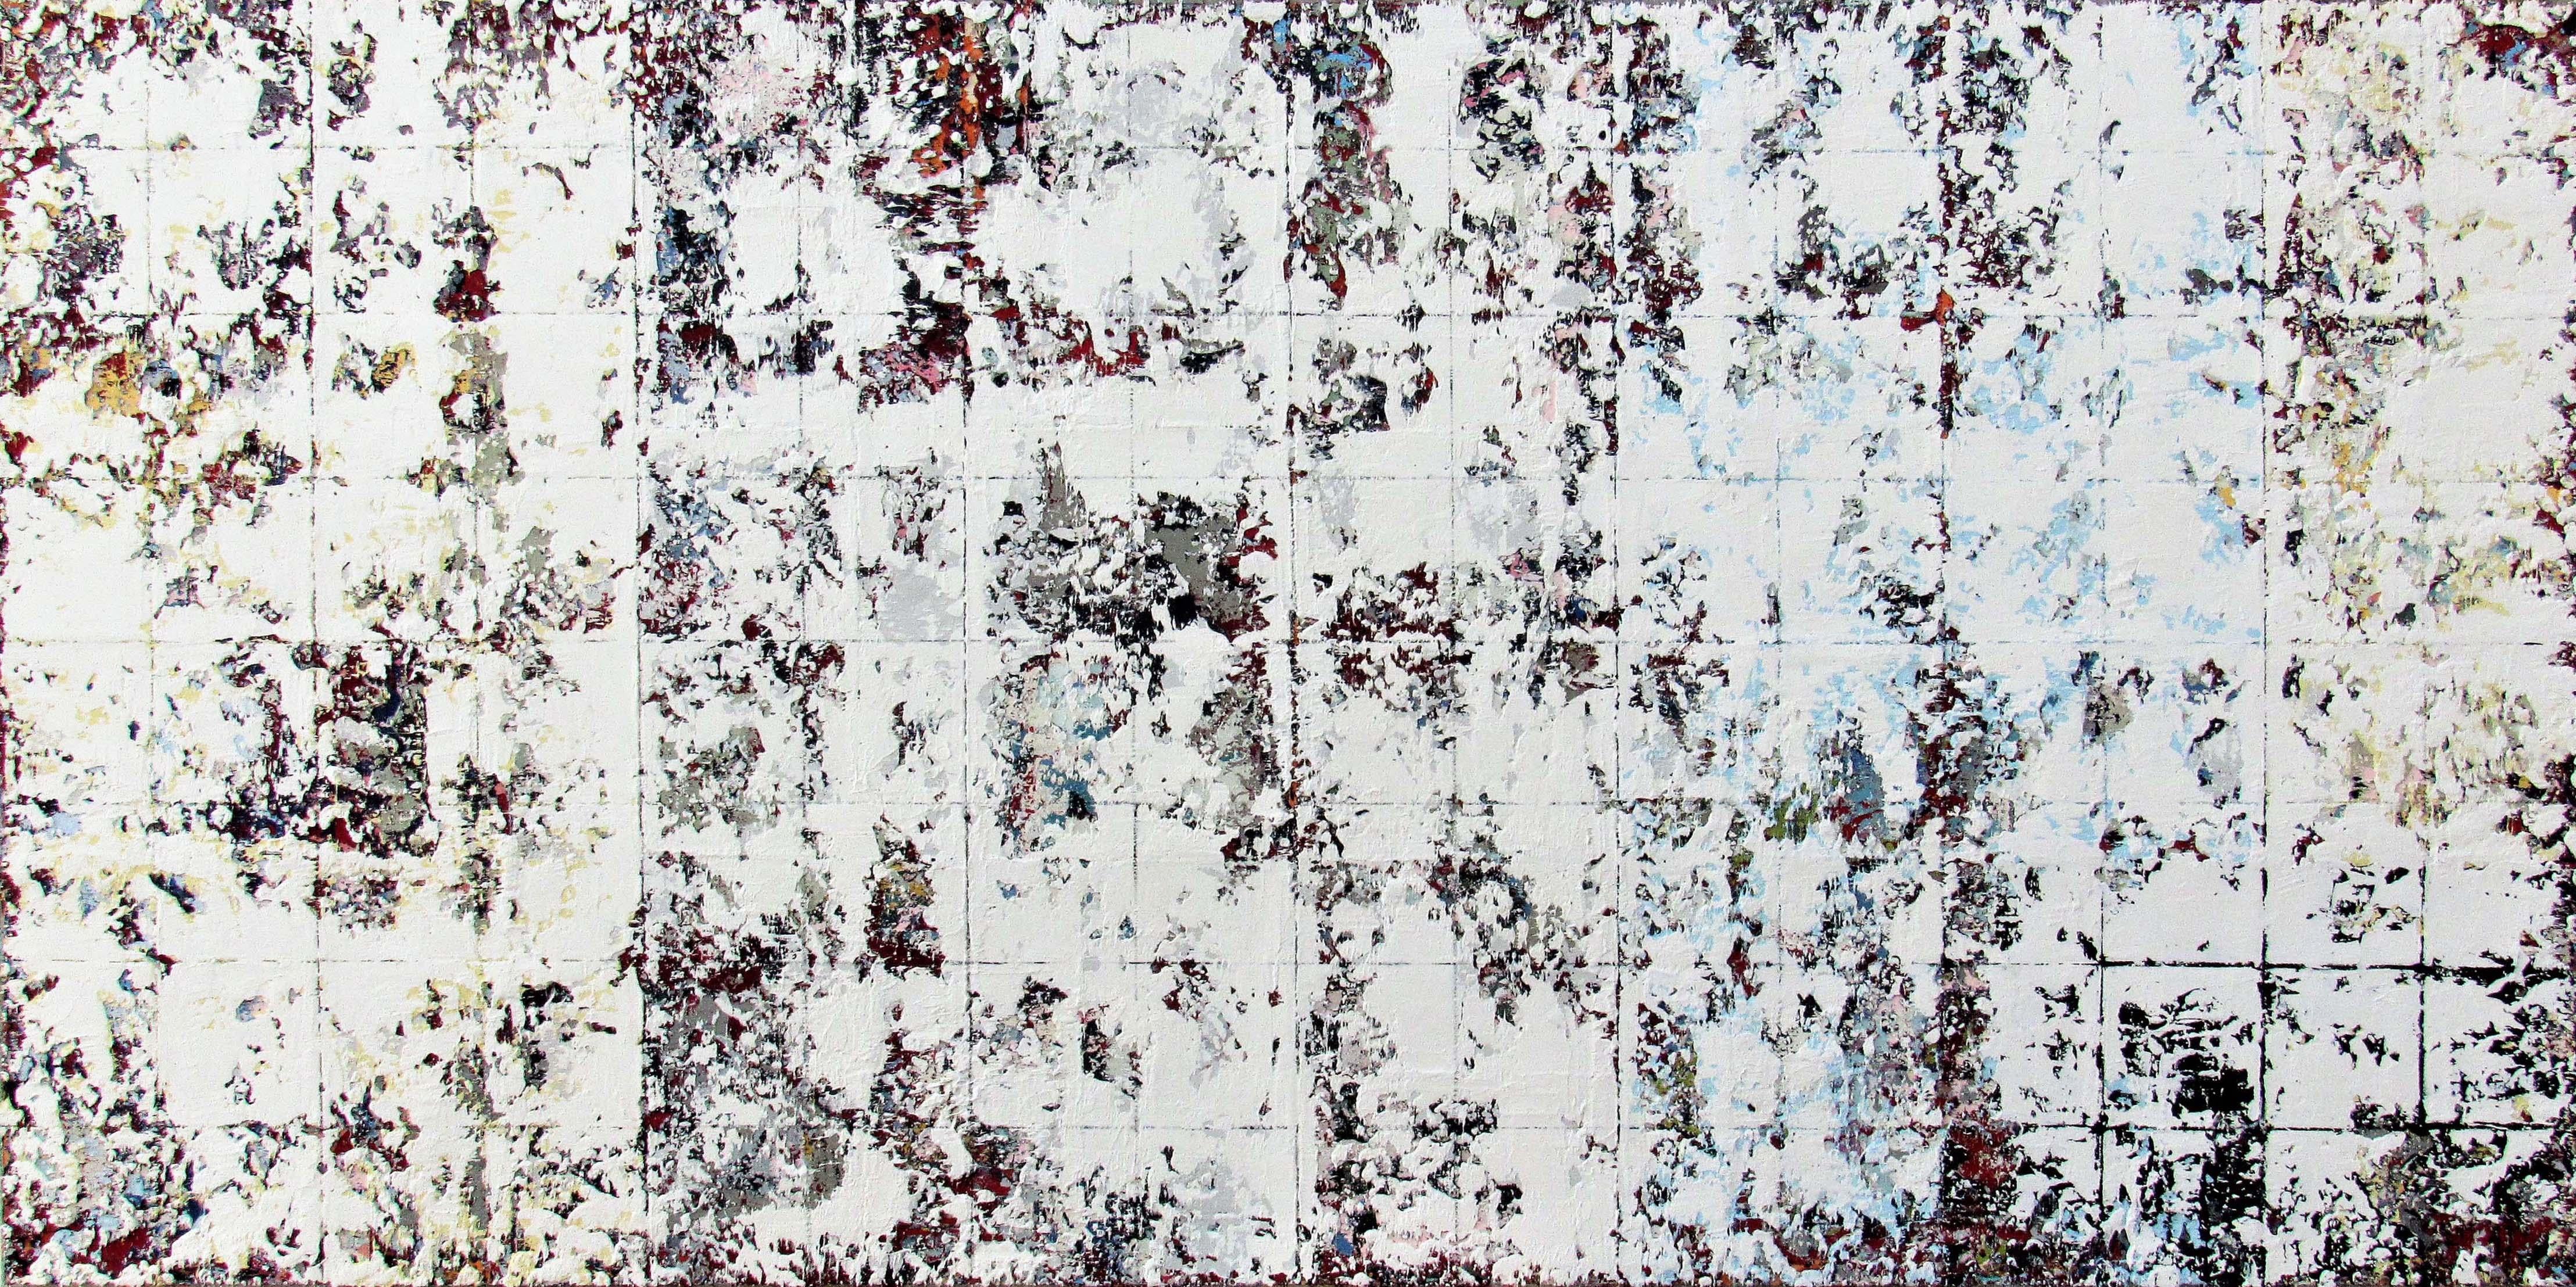 White Squares - contemporary white geometric abstract textured oil painting  - Painting by Brian Neish